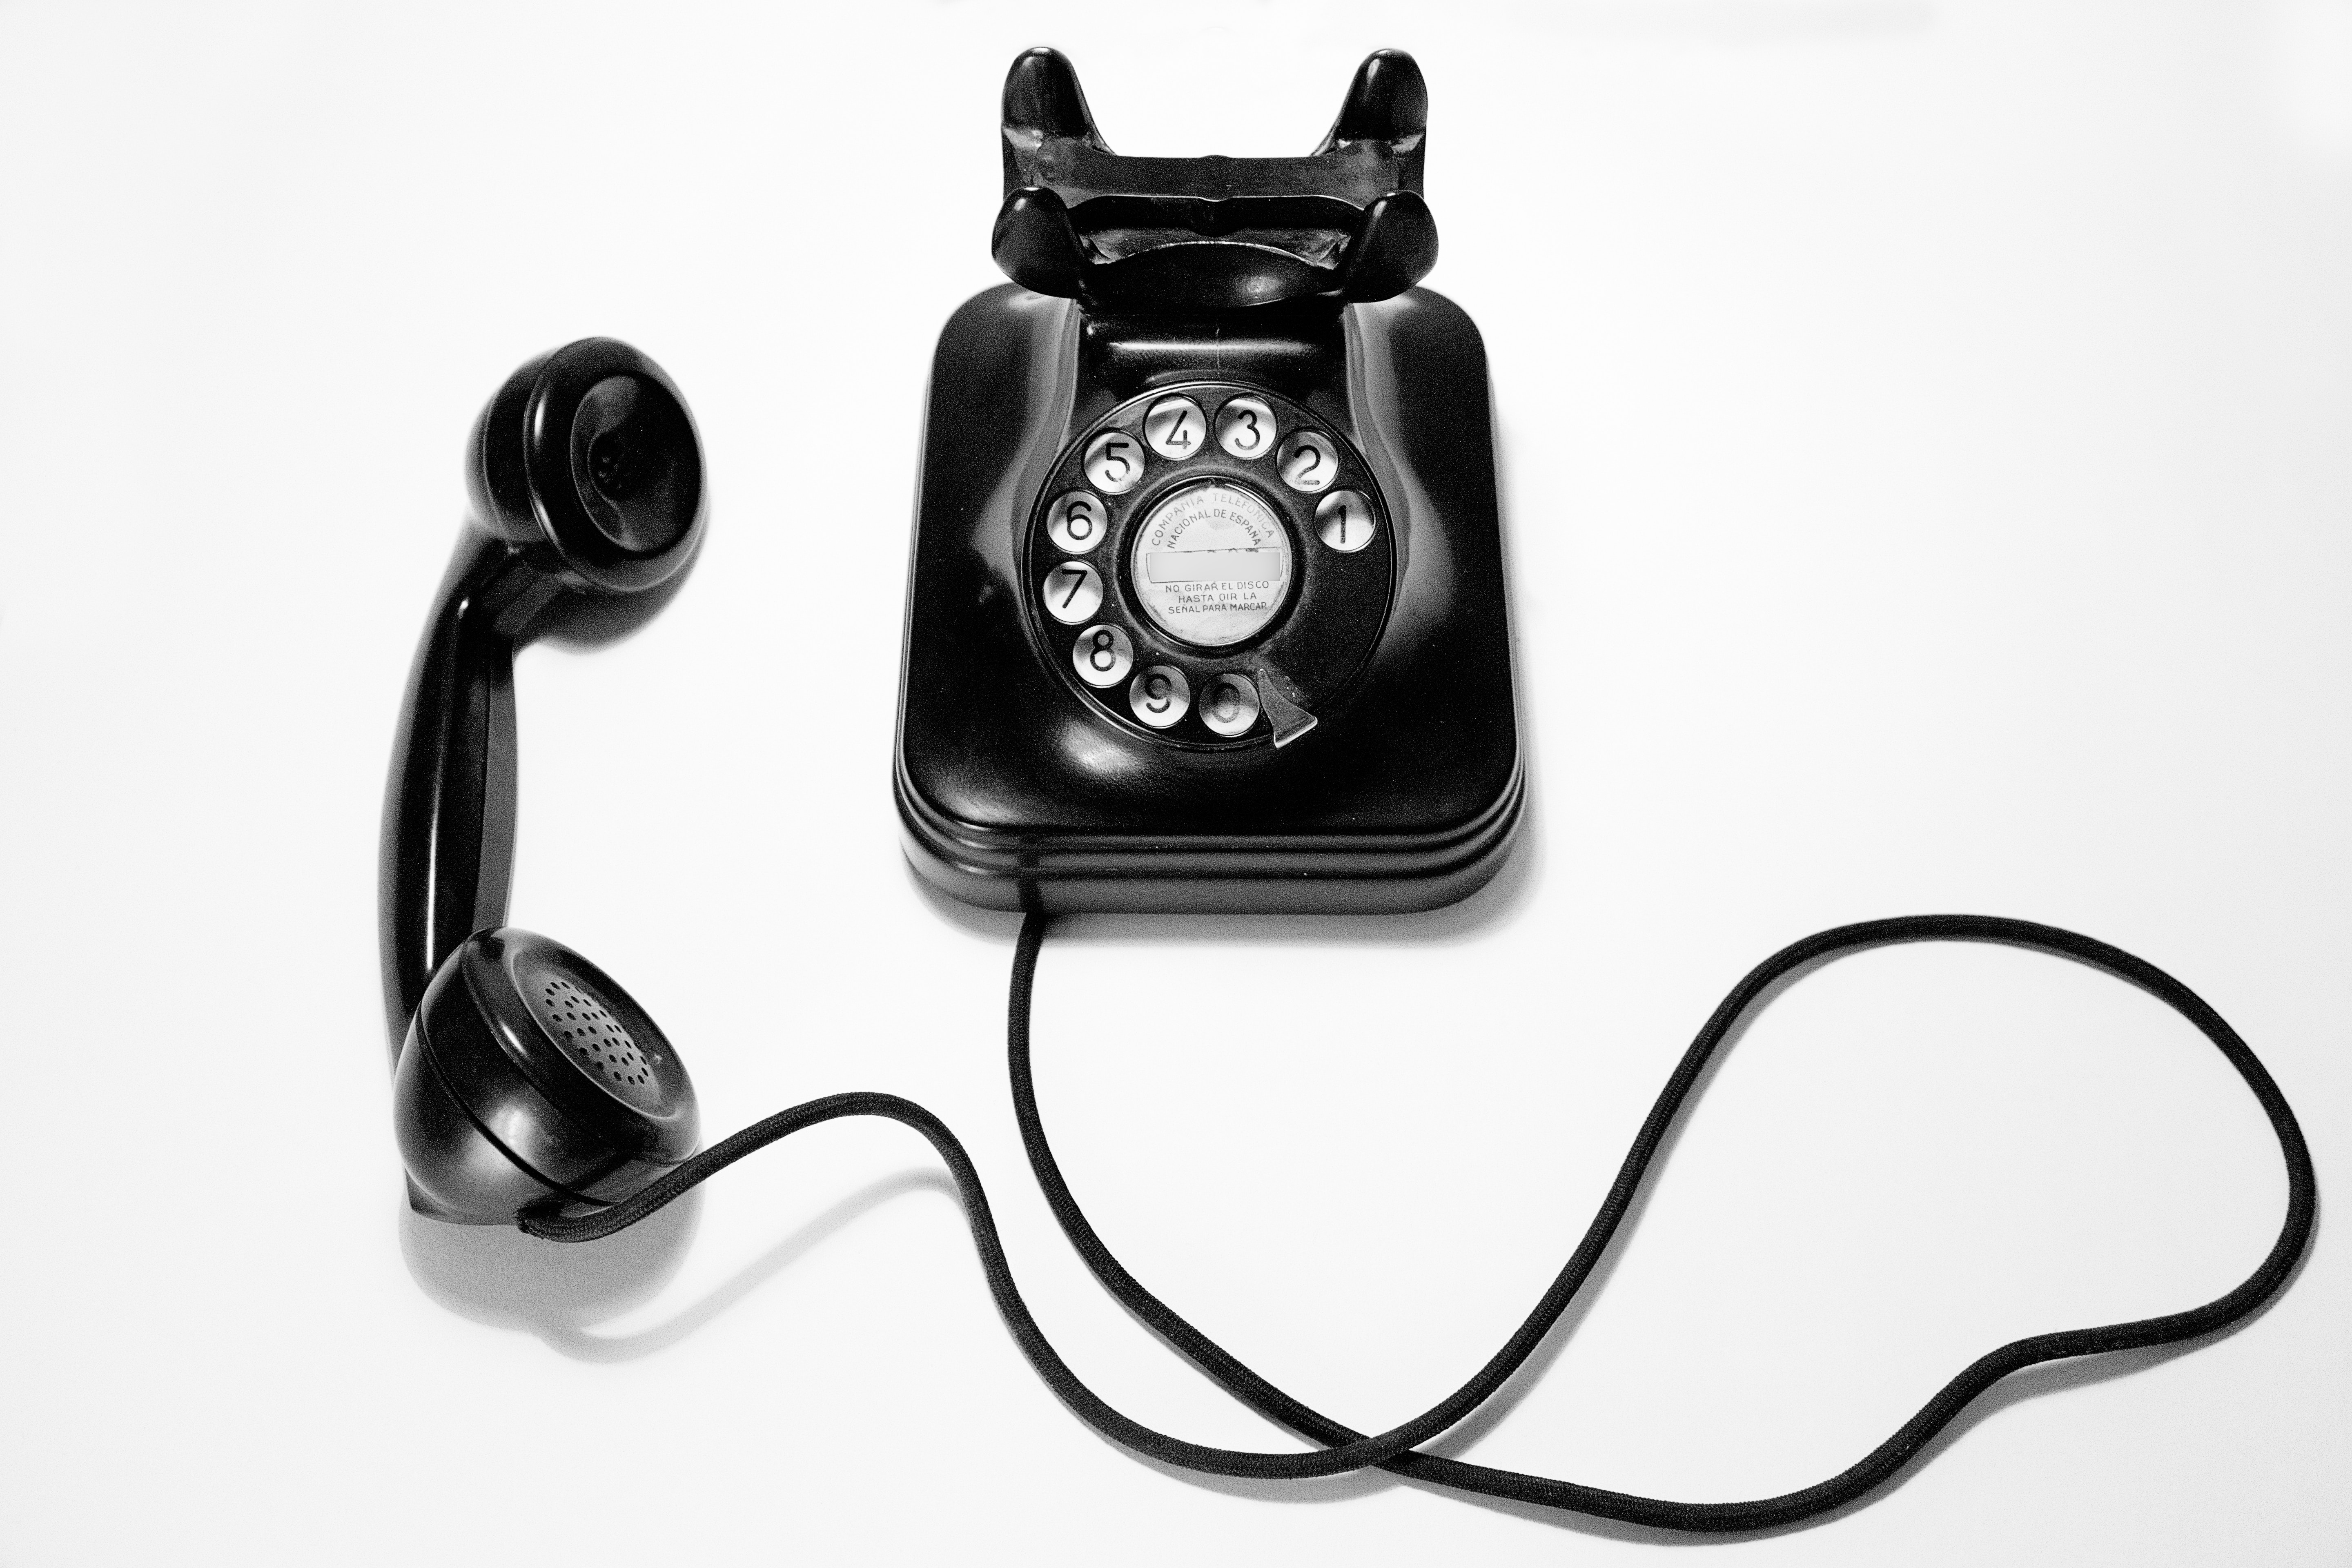 a-call-with-no-caller-id-how-can-you-find-out-who-called